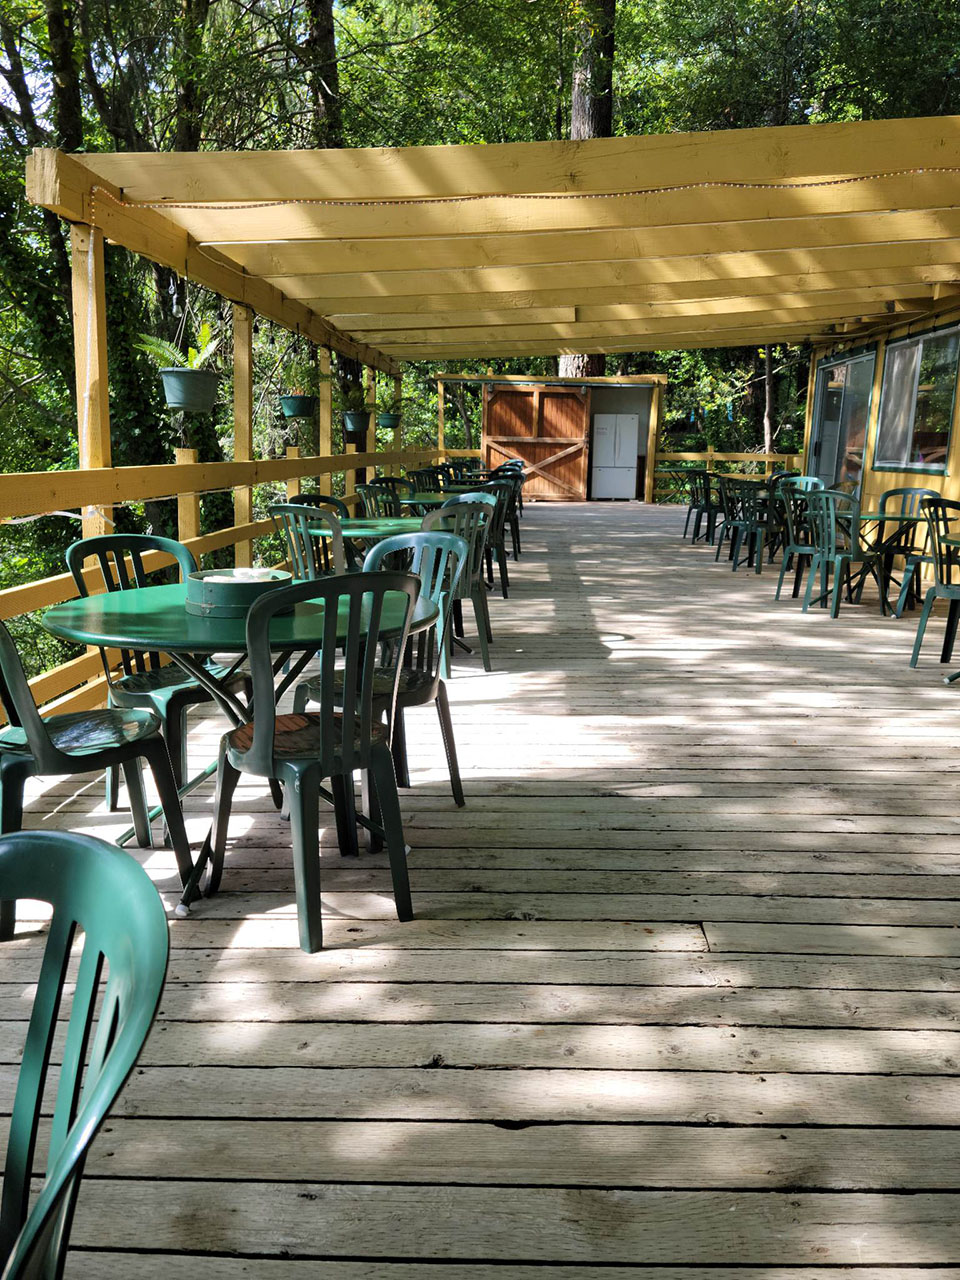 Outdoor deck and dining area at Singing Springs Resort in Agness, Oregon